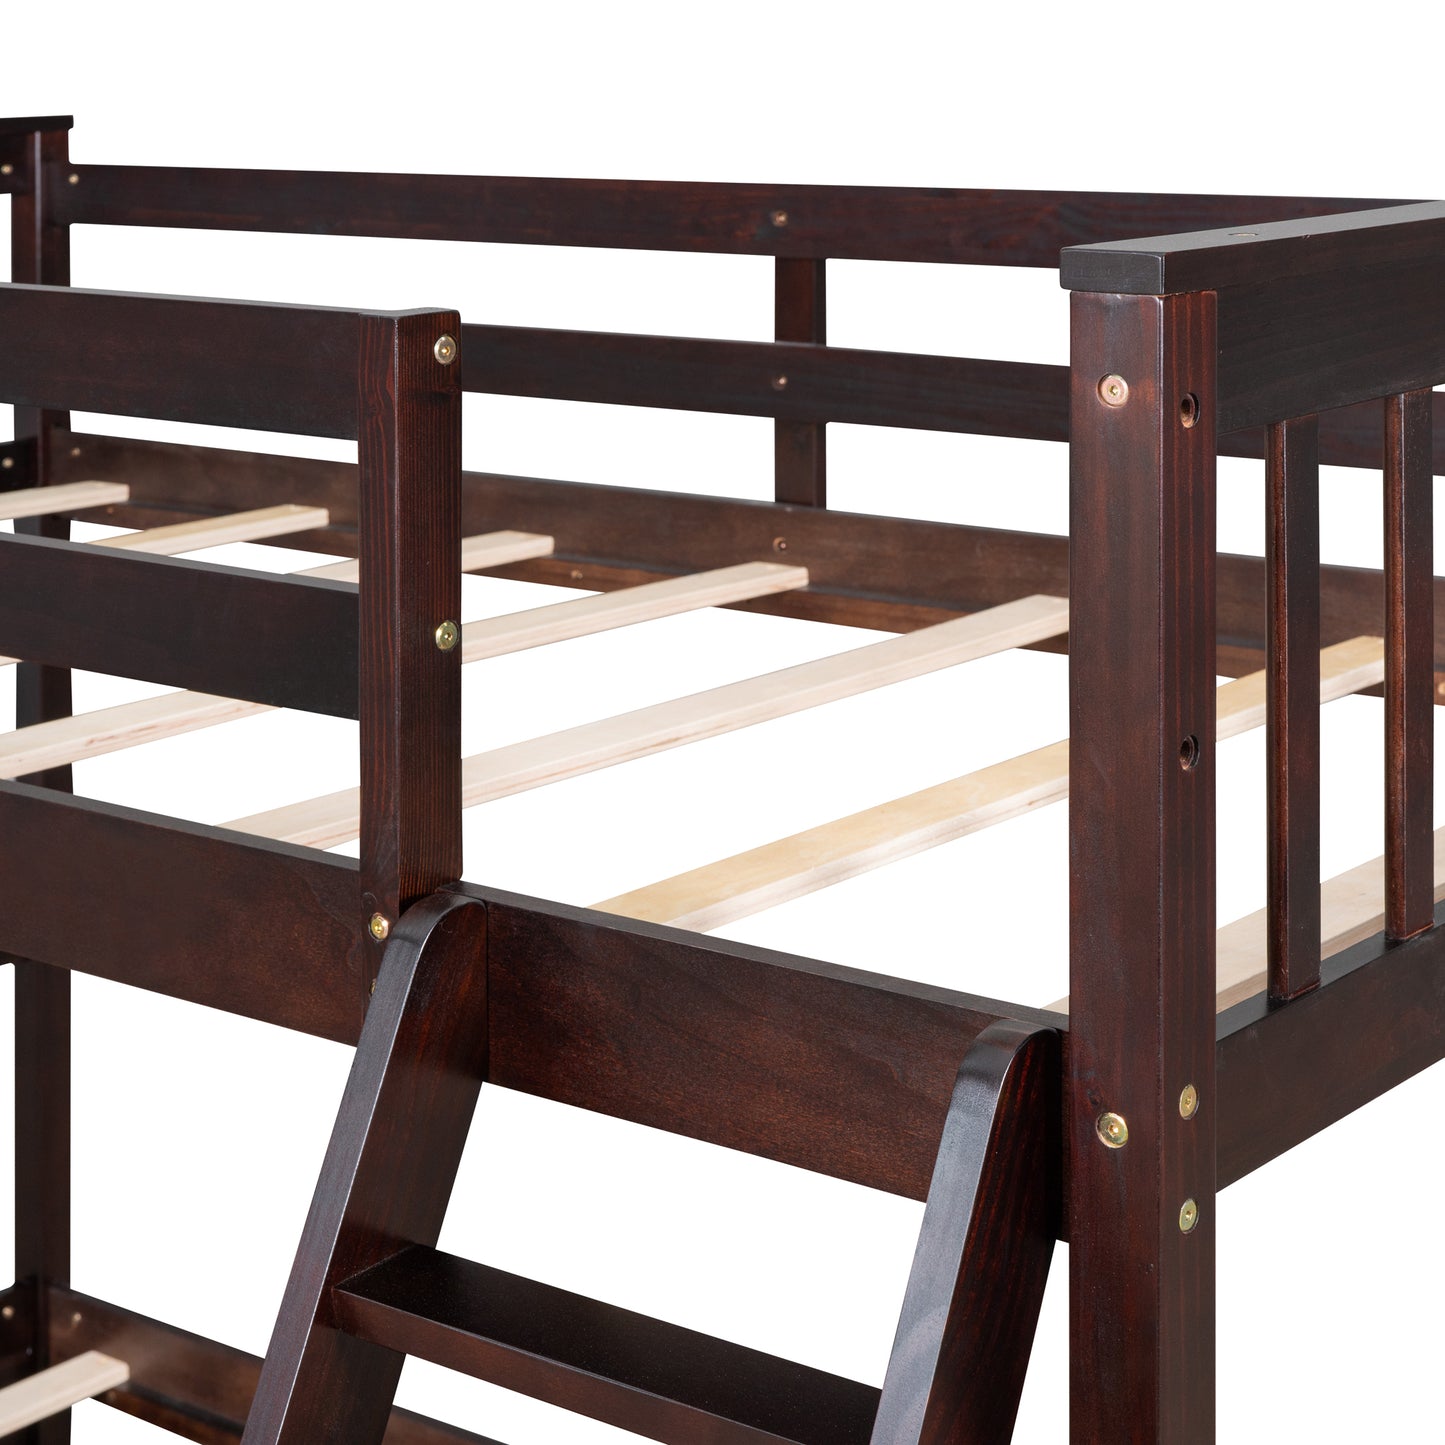 Twin-Over-Full Bunk Bed with Ladders and Two Storage Drawers(Espresso)